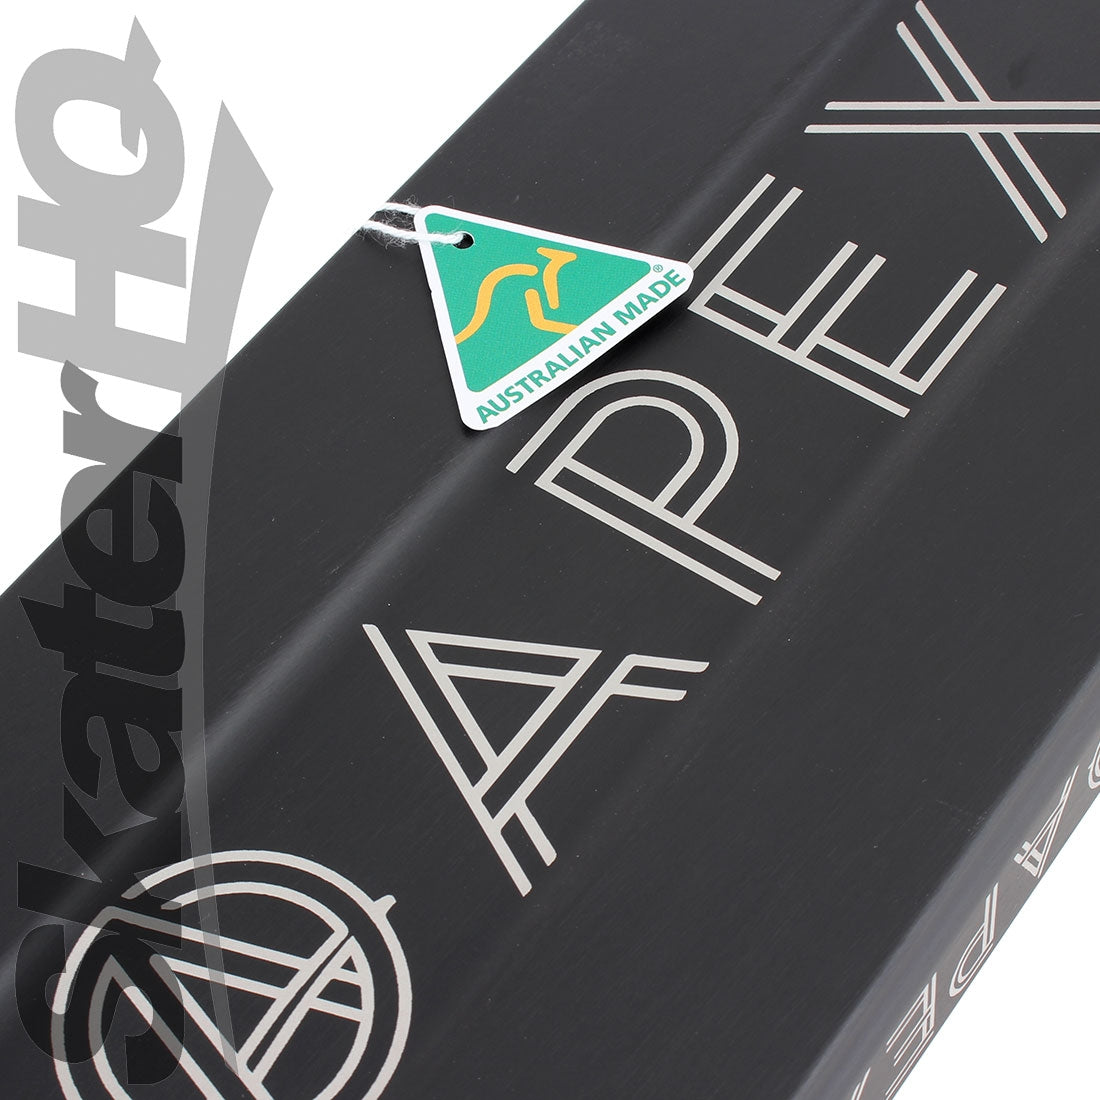 Apex 5inch 620mm Boxed Deck - Black Scooter Decks